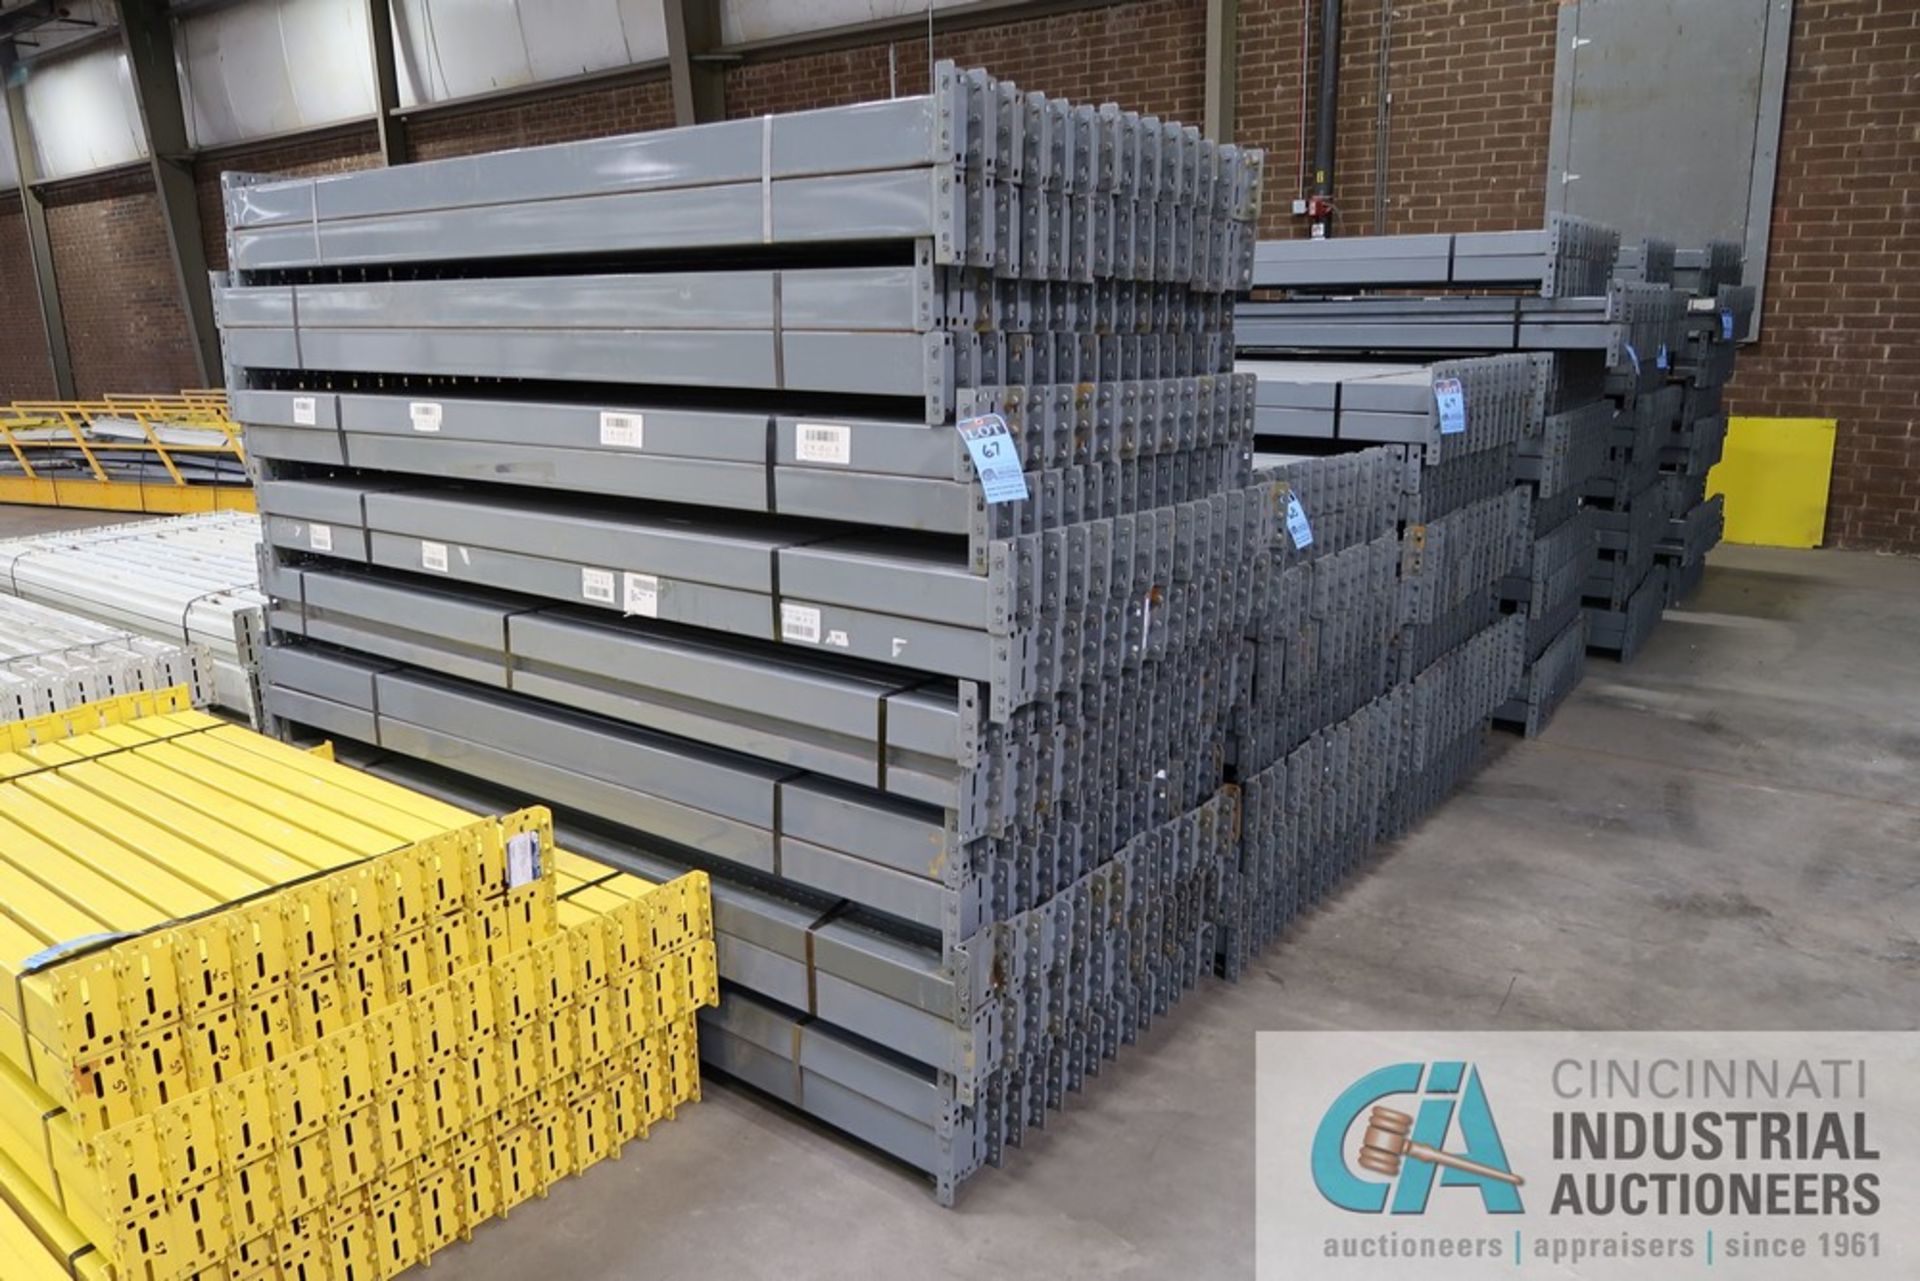 96" X 3.5" TEARDROP PALLET RACK BEAMS - Bid price is per unit multiplied by the quantity **For